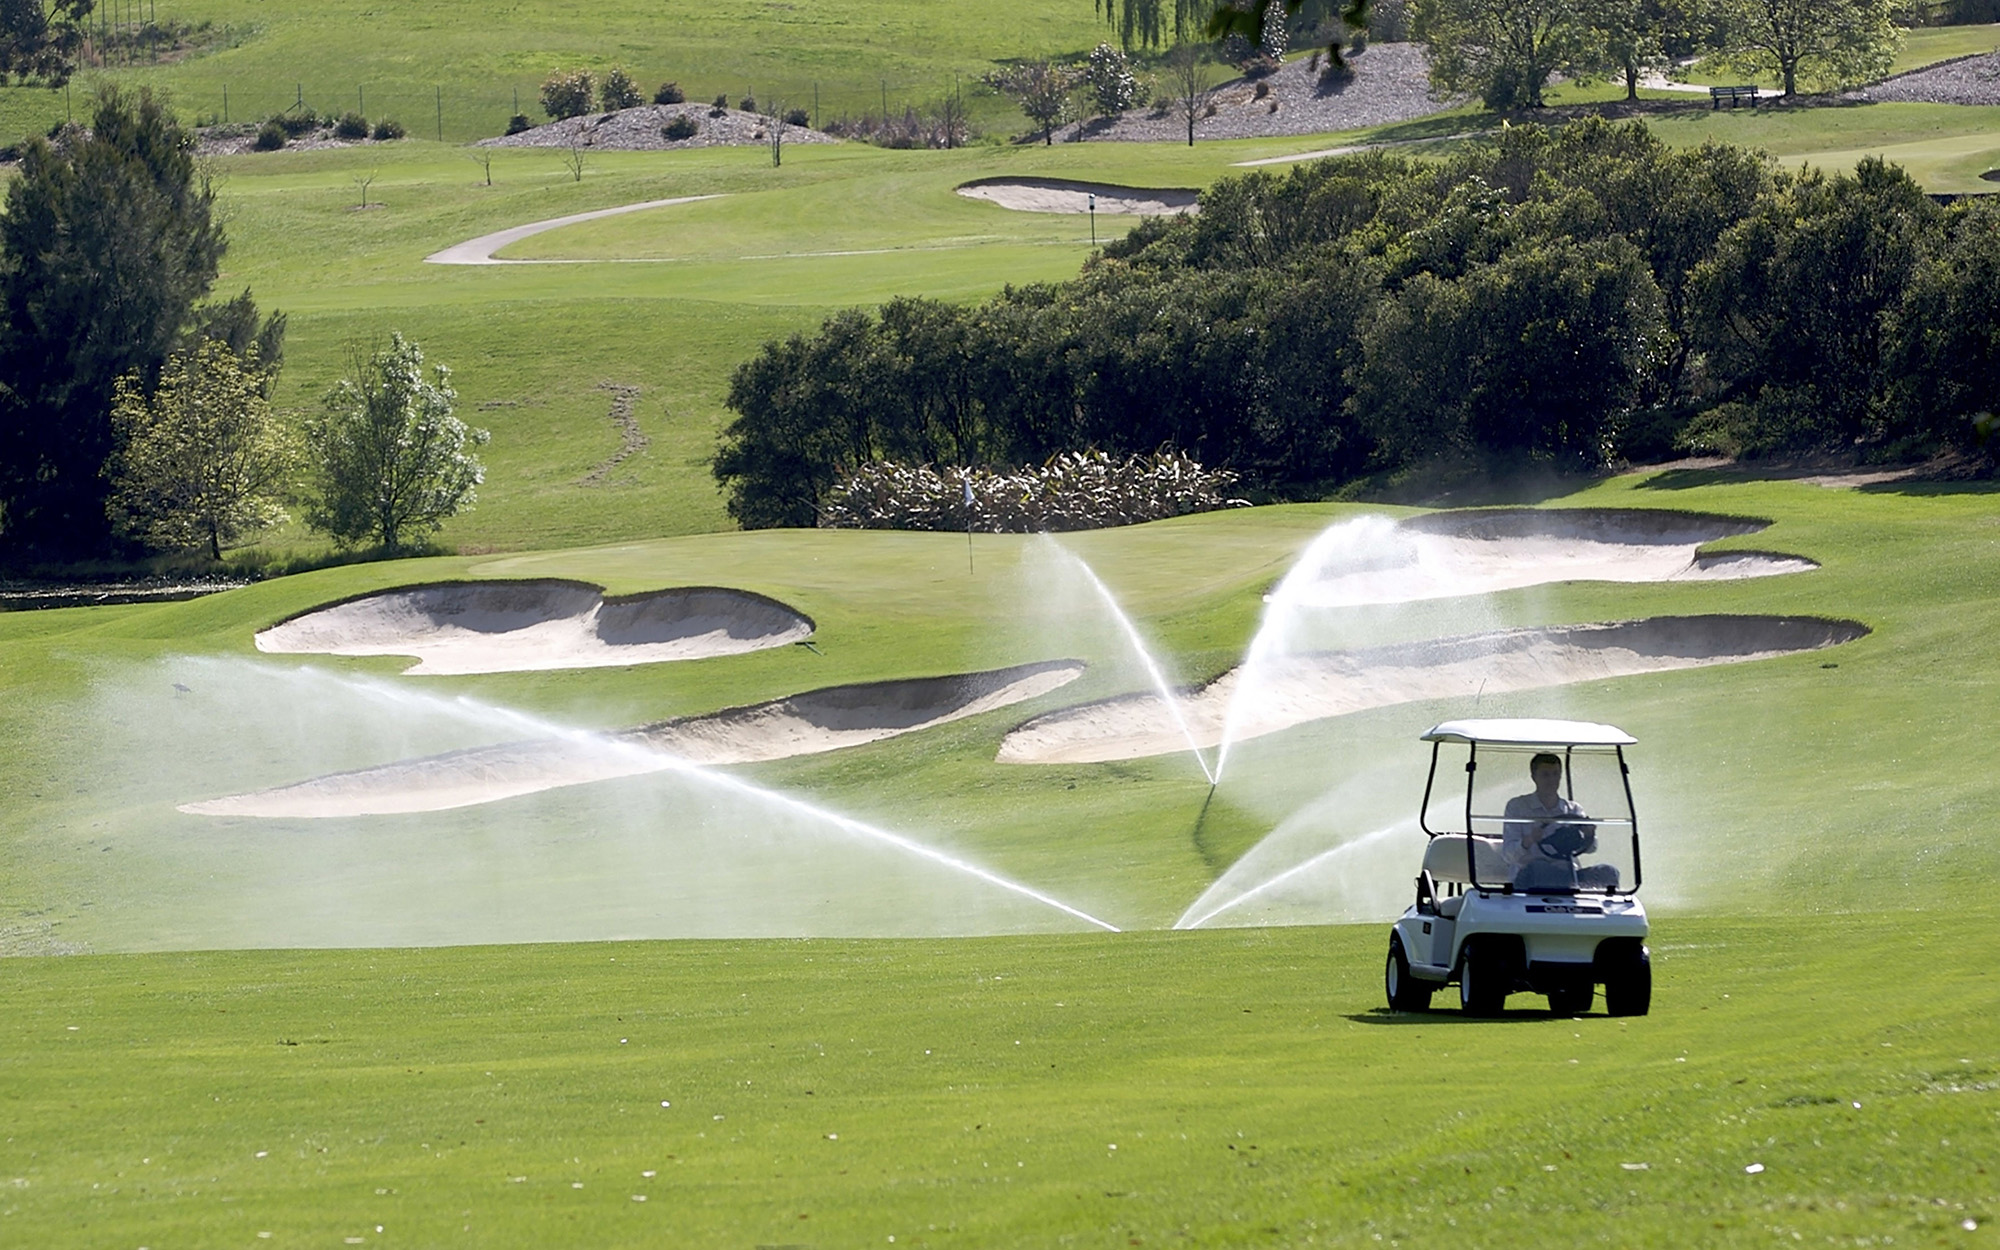 Sprinklers in use on a golf course.